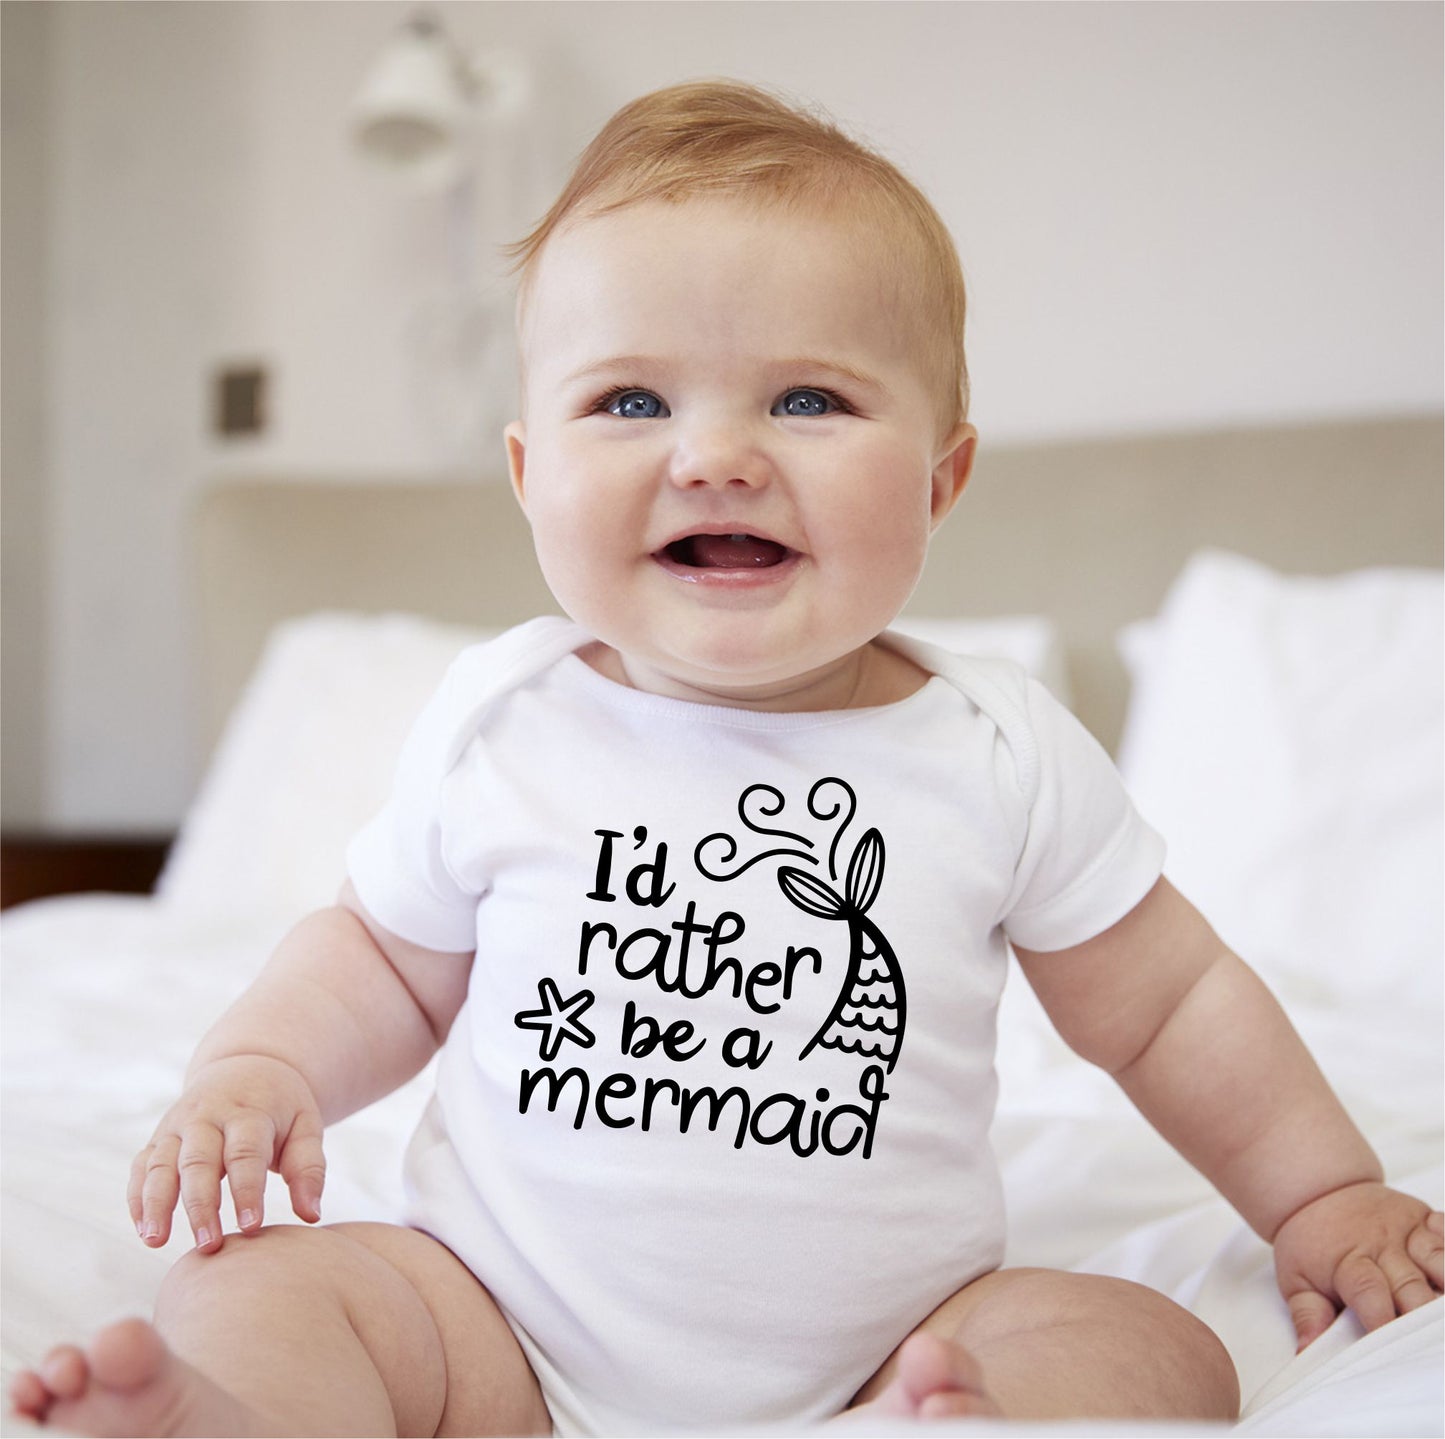 Baby Statement Onesies - I'd Rather Be a Mermaid